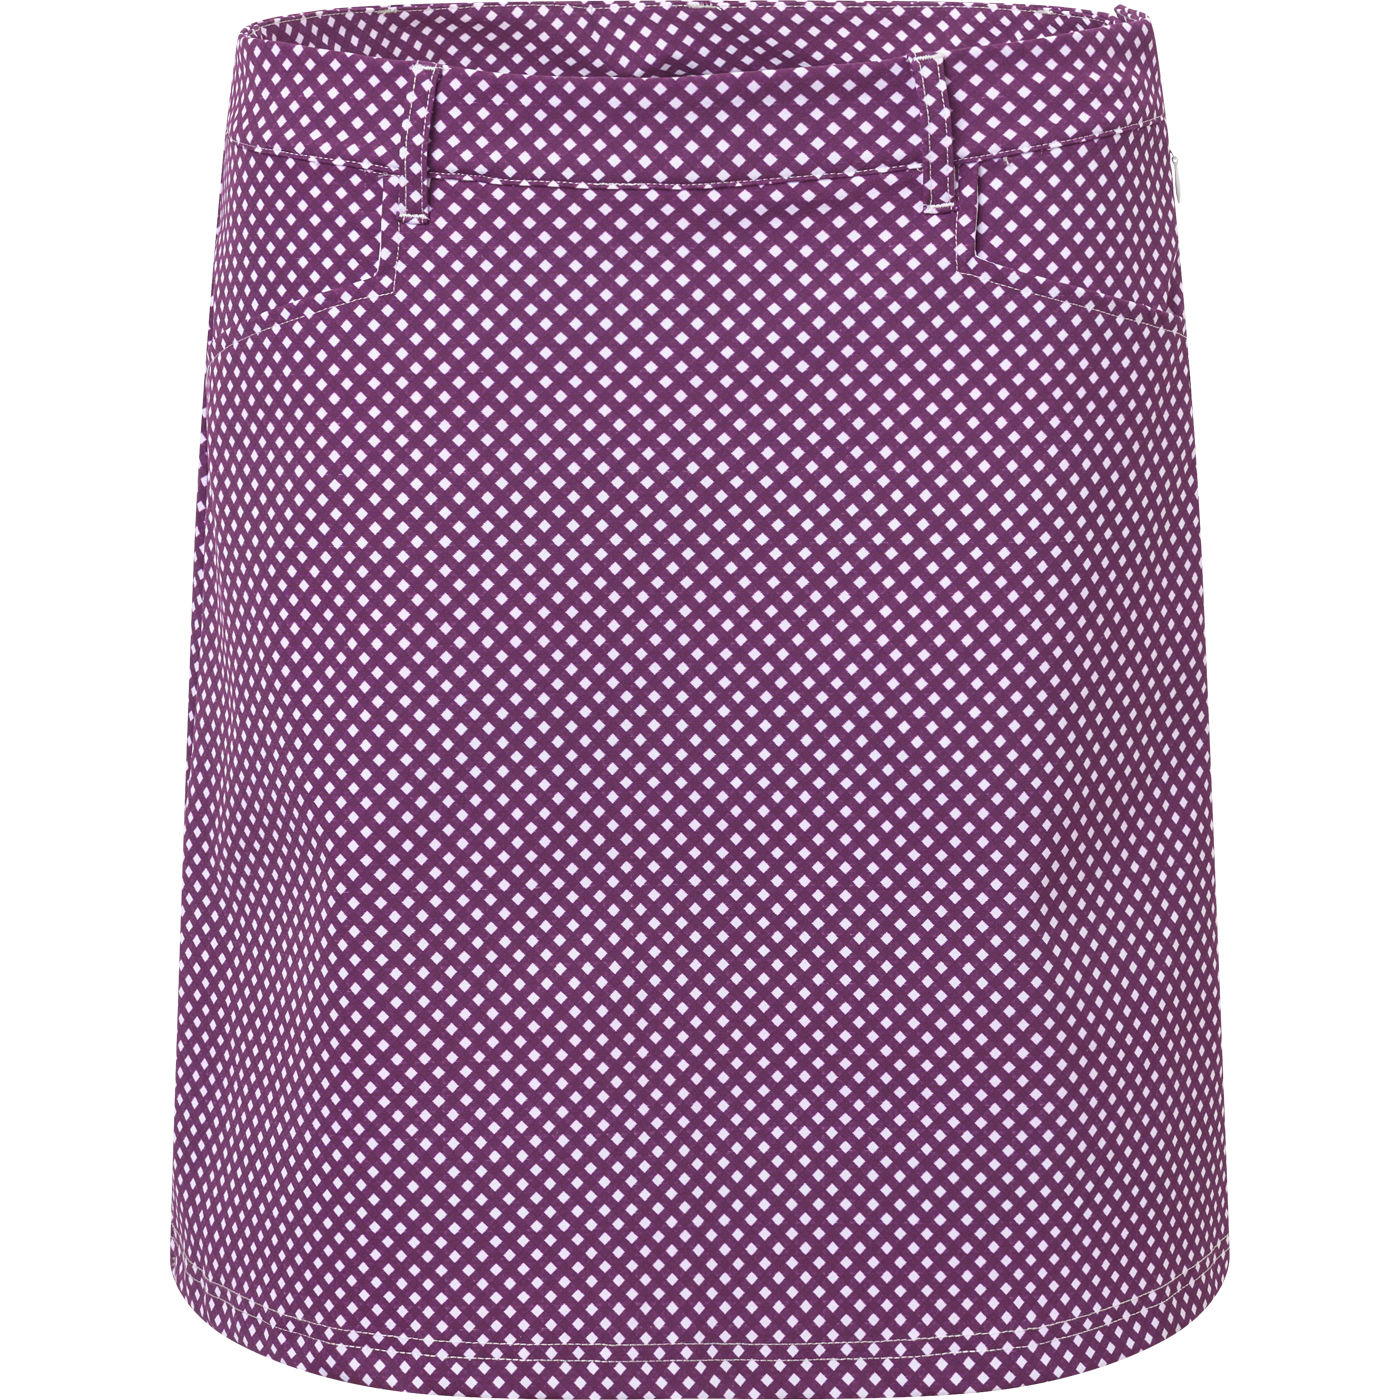 Lds Merion skort 45cm - violet check in the group WOMEN / All clothing at Abacus Sportswear (2983735)